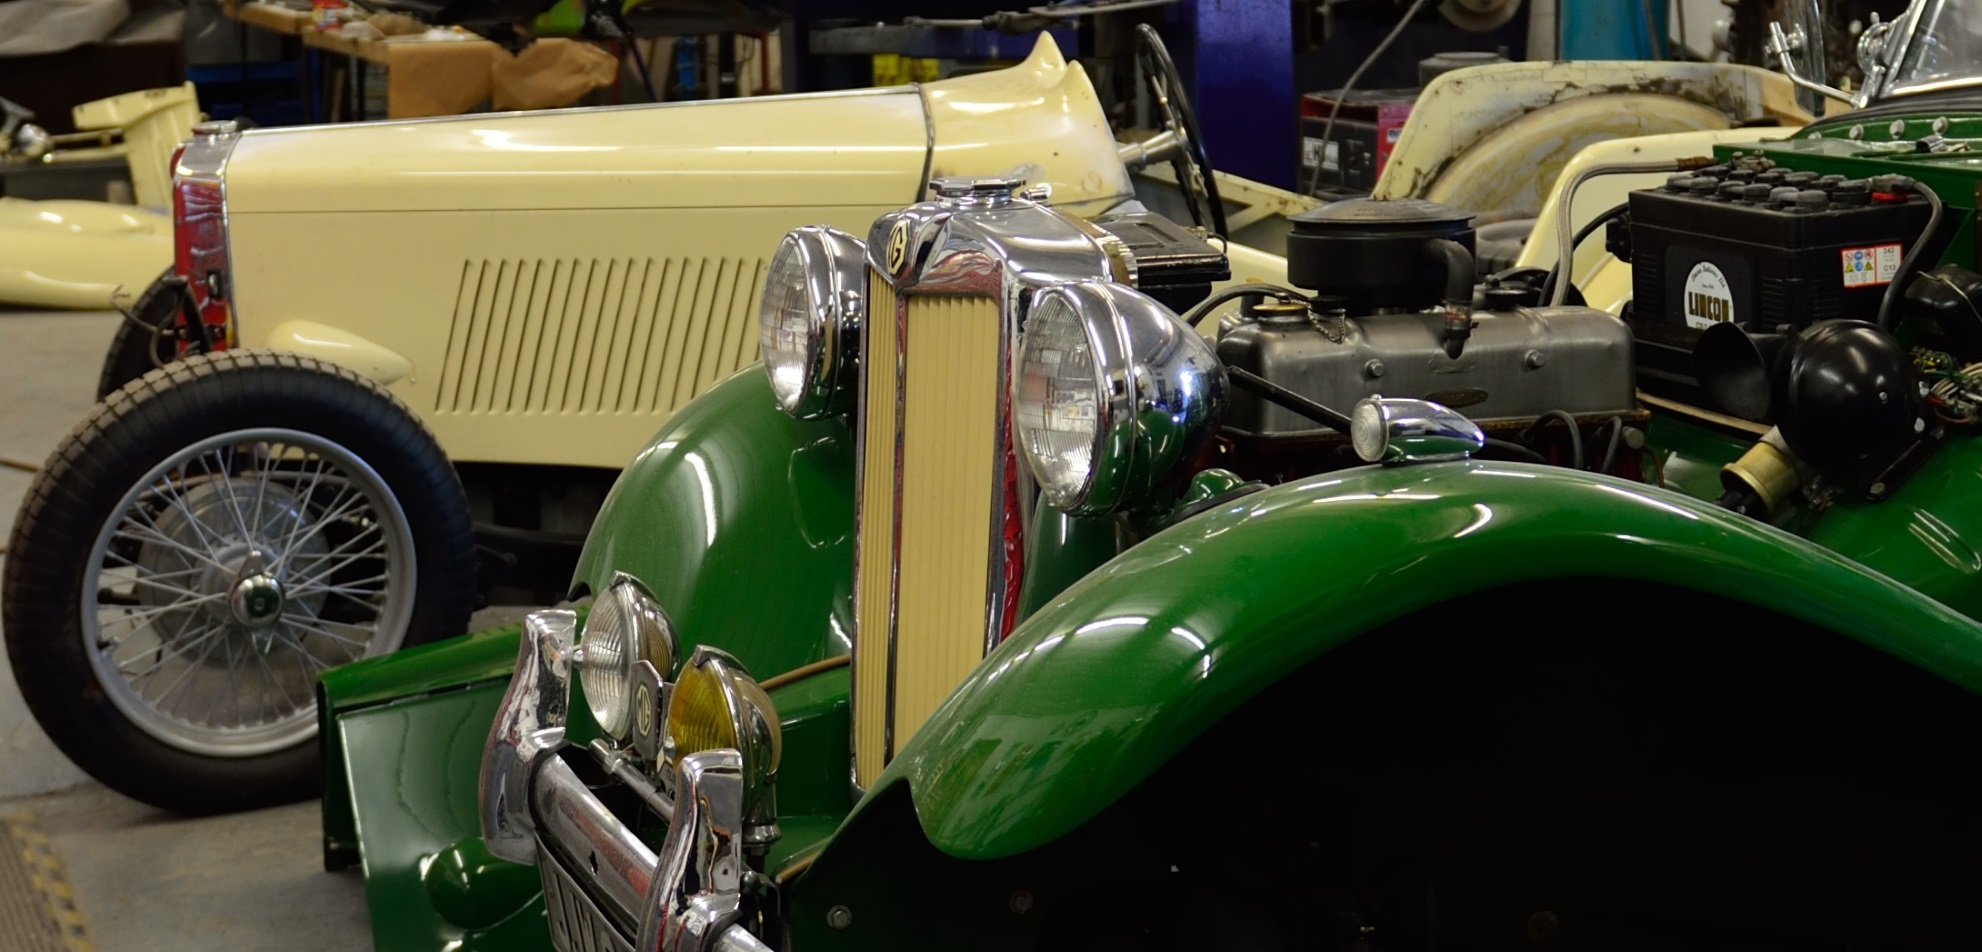 MG TD in for Servicing, MG TC in for restortation